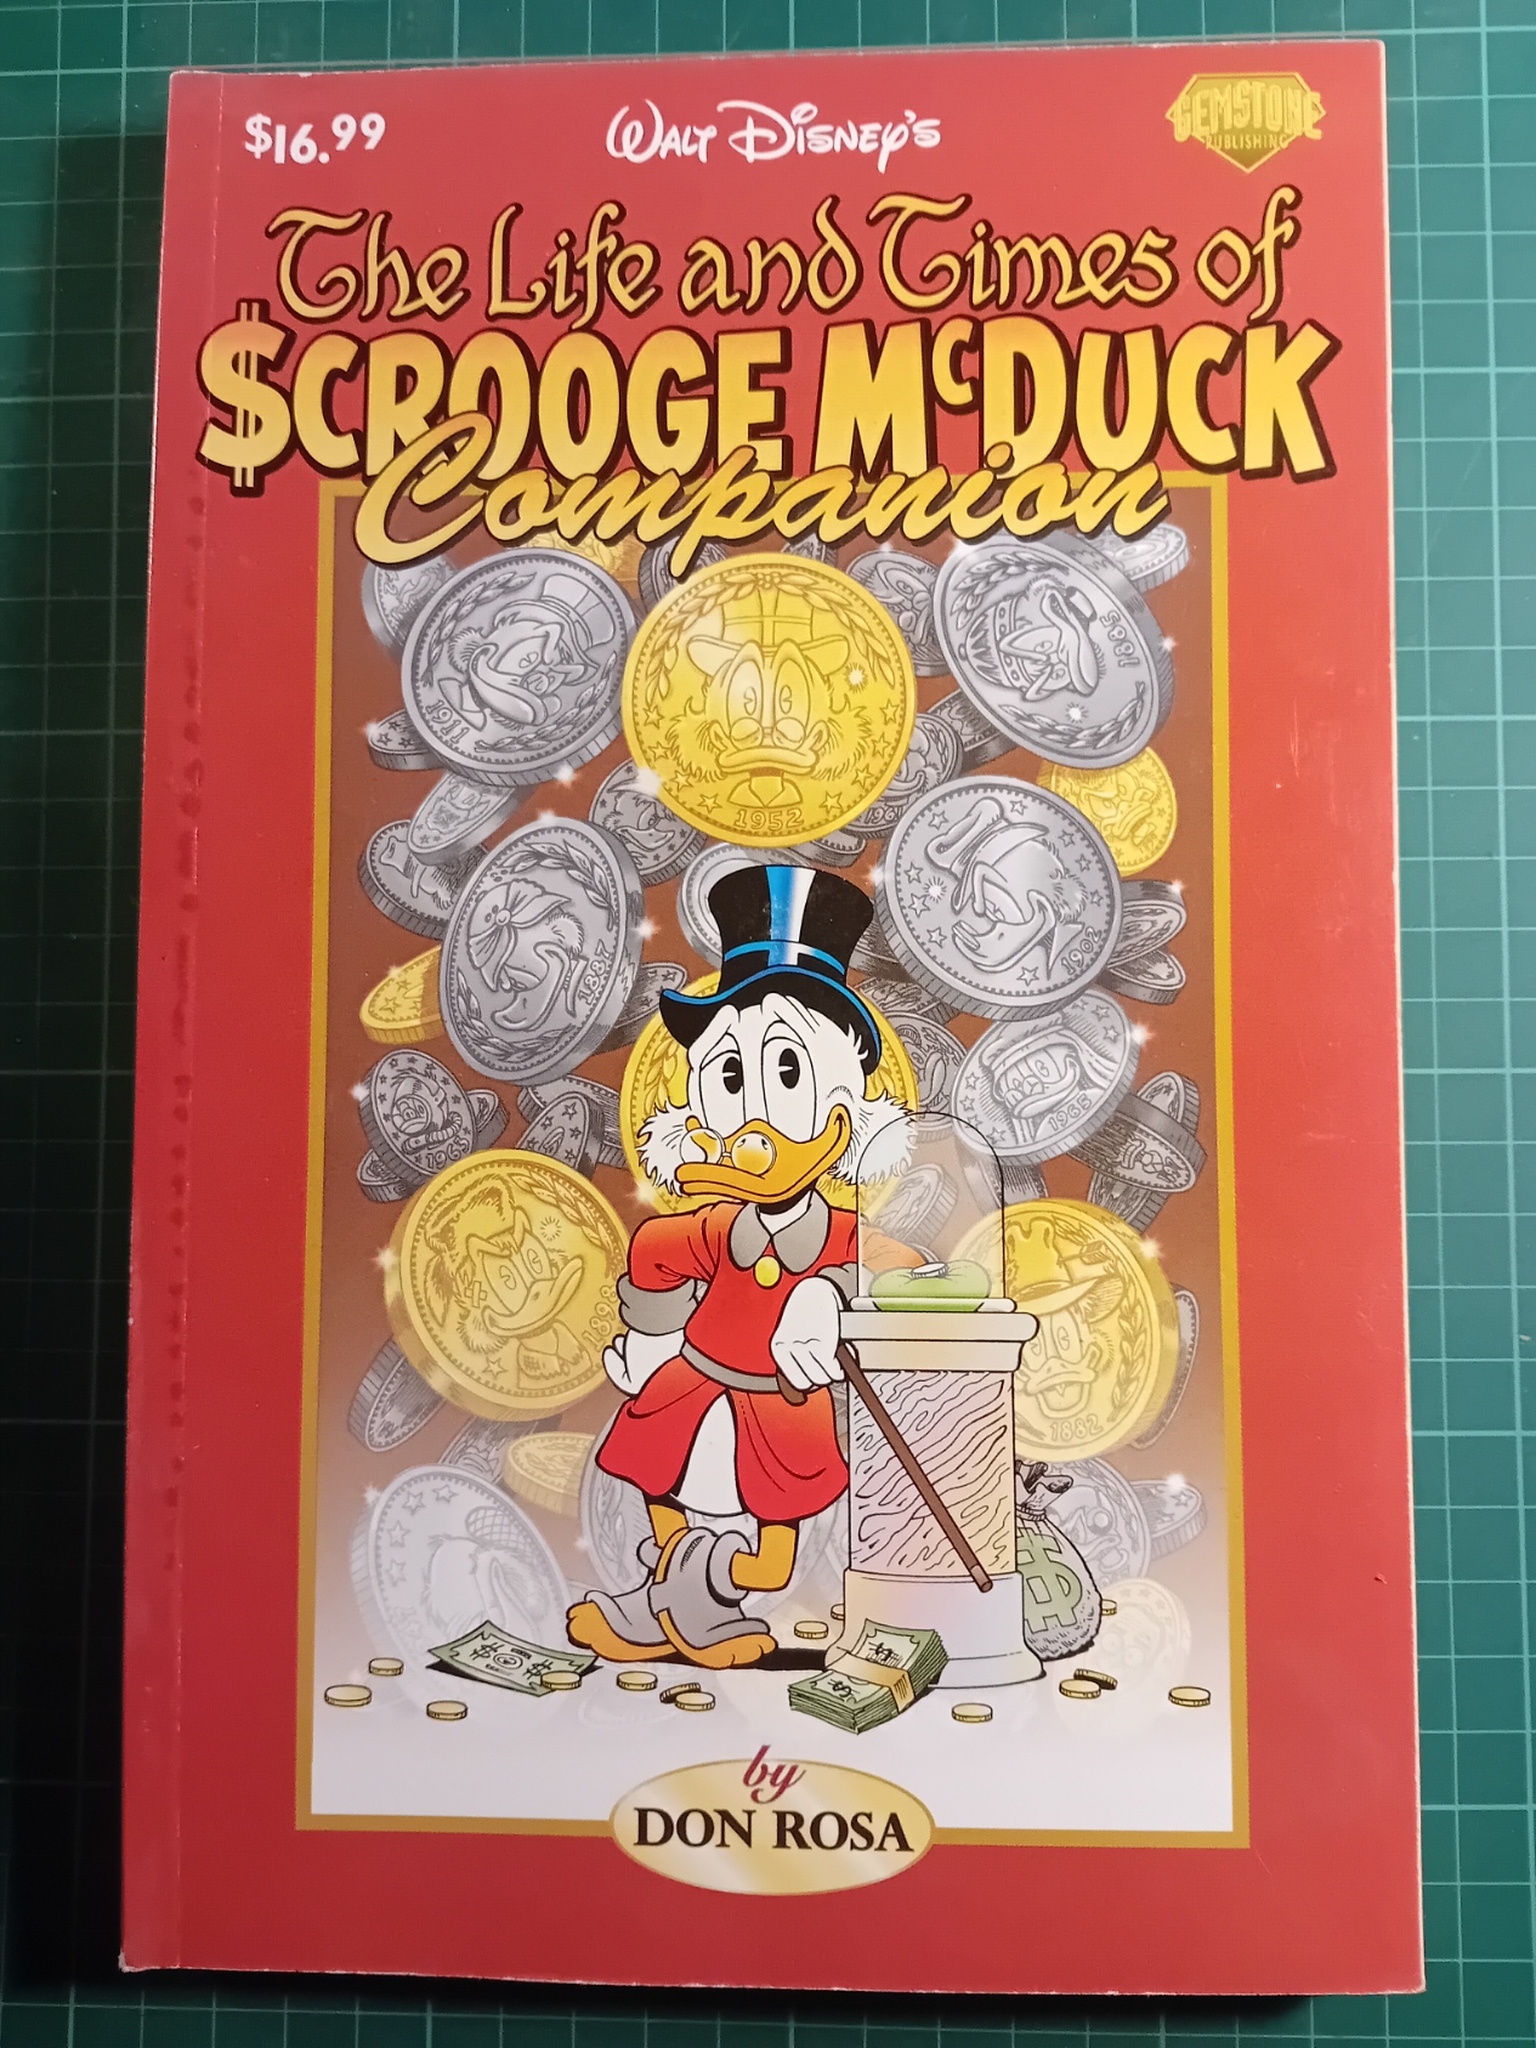 The life and times of Scrooge McDuck companion (USA)